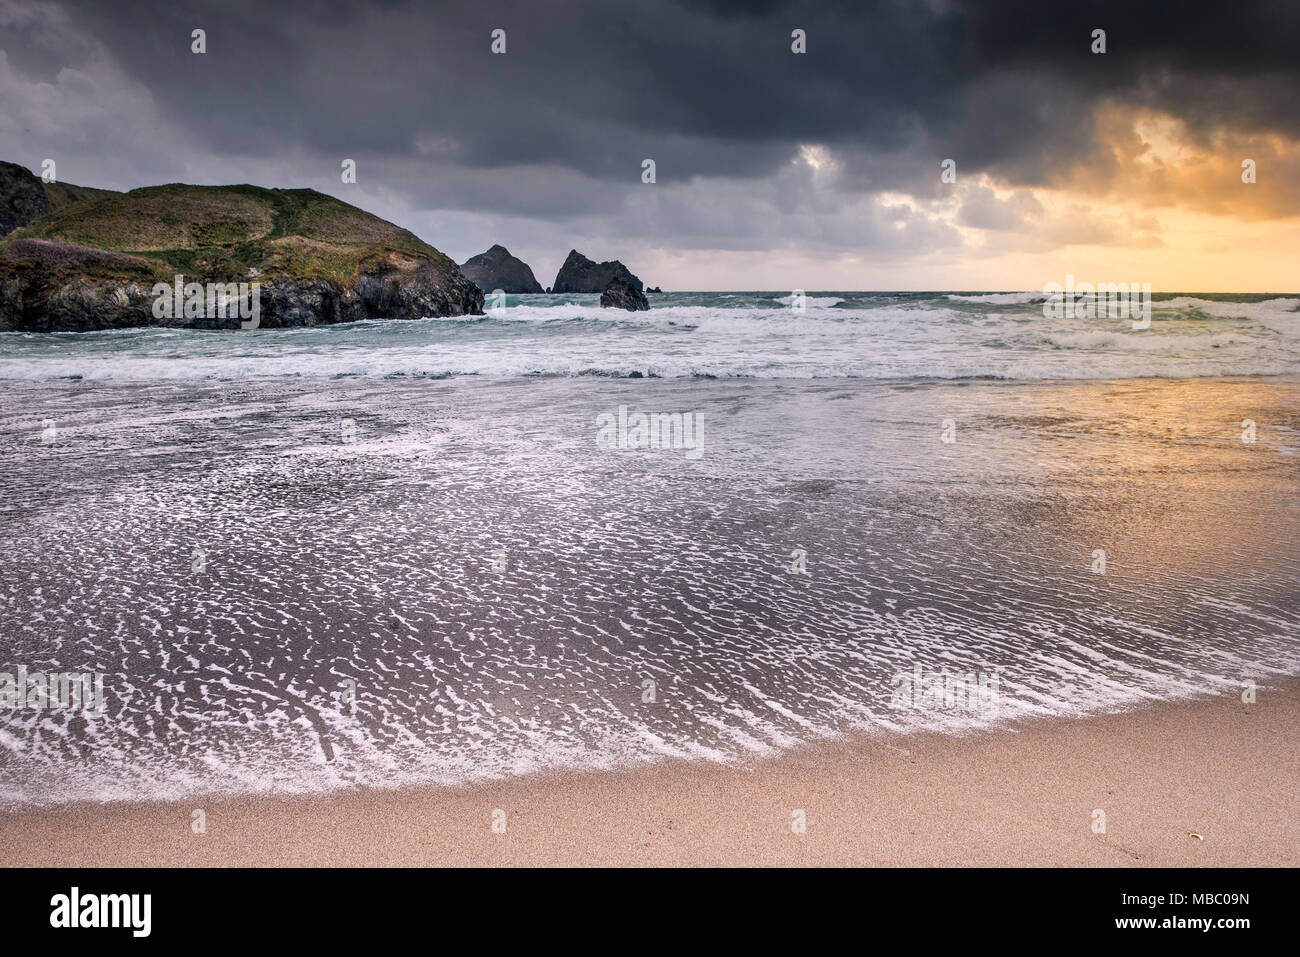 UK weather - Rainclouds gathering at the end of the day at Holywell Bay in Cornwall. Stock Photo